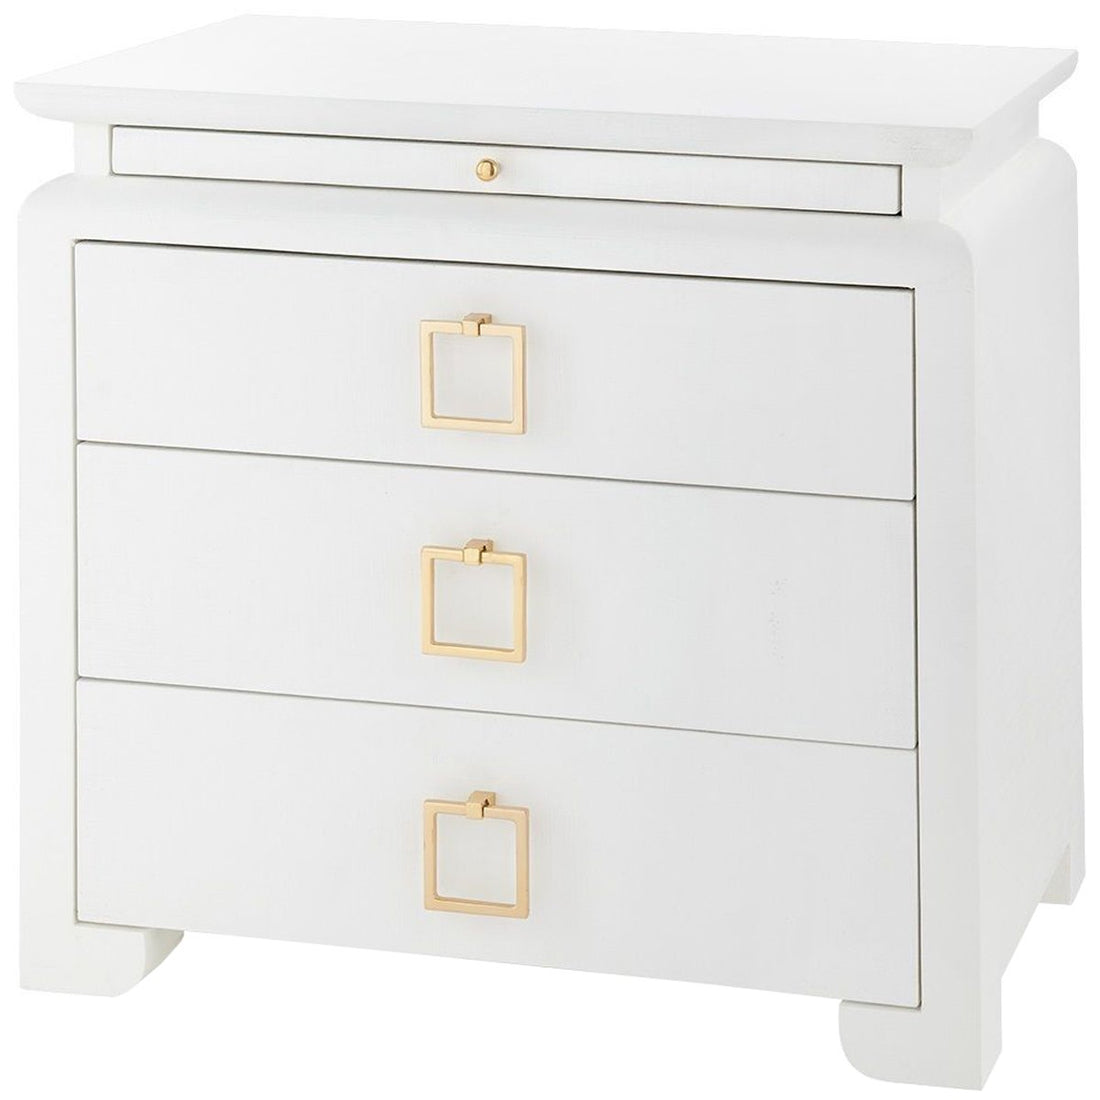 Villa & House Elina 3-Drawer Side Table, White in Santino Pull